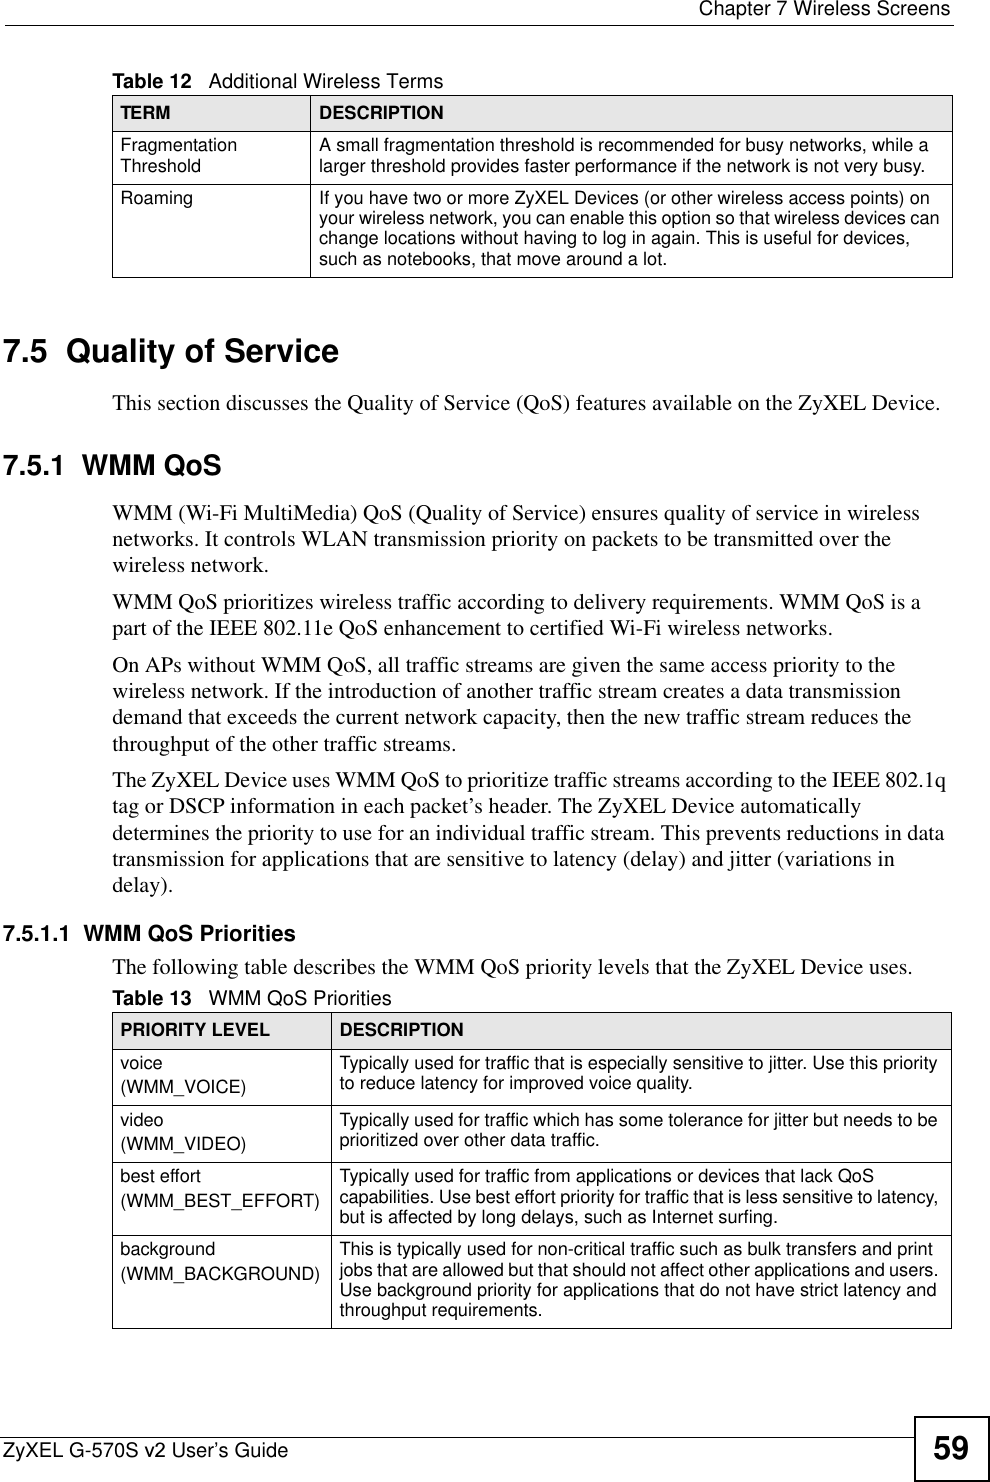  Chapter 7 Wireless ScreensZyXEL G-570S v2 User’s Guide 597.5  Quality of ServiceThis section discusses the Quality of Service (QoS) features available on the ZyXEL Device.7.5.1  WMM QoSWMM (Wi-Fi MultiMedia) QoS (Quality of Service) ensures quality of service in wireless networks. It controls WLAN transmission priority on packets to be transmitted over the wireless network.WMM QoS prioritizes wireless traffic according to delivery requirements. WMM QoS is a part of the IEEE 802.11e QoS enhancement to certified Wi-Fi wireless networks.On APs without WMM QoS, all traffic streams are given the same access priority to the wireless network. If the introduction of another traffic stream creates a data transmission demand that exceeds the current network capacity, then the new traffic stream reduces the throughput of the other traffic streams.The ZyXEL Device uses WMM QoS to prioritize traffic streams according to the IEEE 802.1q tag or DSCP information in each packet’s header. The ZyXEL Device automatically determines the priority to use for an individual traffic stream. This prevents reductions in data transmission for applications that are sensitive to latency (delay) and jitter (variations in delay).7.5.1.1  WMM QoS PrioritiesThe following table describes the WMM QoS priority levels that the ZyXEL Device uses.Fragmentation Threshold A small fragmentation threshold is recommended for busy networks, while a larger threshold provides faster performance if the network is not very busy.Roaming If you have two or more ZyXEL Devices (or other wireless access points) on your wireless network, you can enable this option so that wireless devices can change locations without having to log in again. This is useful for devices, such as notebooks, that move around a lot.Table 12   Additional Wireless TermsTERM DESCRIPTIONTable 13   WMM QoS PrioritiesPRIORITY LEVEL DESCRIPTIONvoice(WMM_VOICE)Typically used for traffic that is especially sensitive to jitter. Use this priority to reduce latency for improved voice quality.video(WMM_VIDEO)Typically used for traffic which has some tolerance for jitter but needs to be prioritized over other data traffic.best effort(WMM_BEST_EFFORT)Typically used for traffic from applications or devices that lack QoS capabilities. Use best effort priority for traffic that is less sensitive to latency, but is affected by long delays, such as Internet surfing.background(WMM_BACKGROUND)This is typically used for non-critical traffic such as bulk transfers and print jobs that are allowed but that should not affect other applications and users. Use background priority for applications that do not have strict latency and throughput requirements.